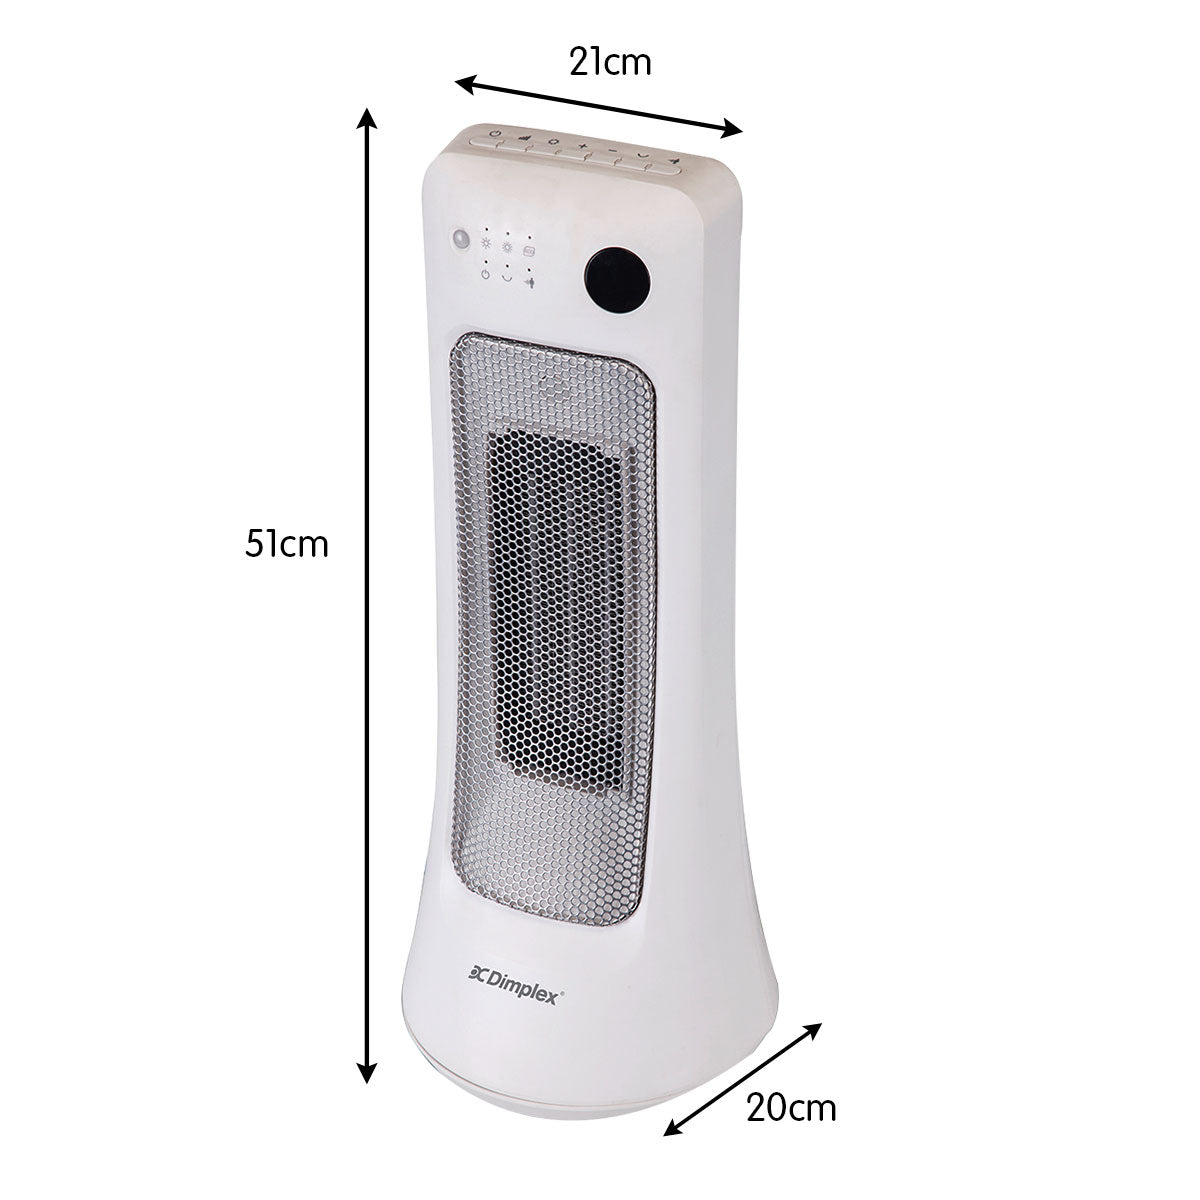 Dimplex 2000W Ceramic Tower Portable Electric Heater - DHCER20SW